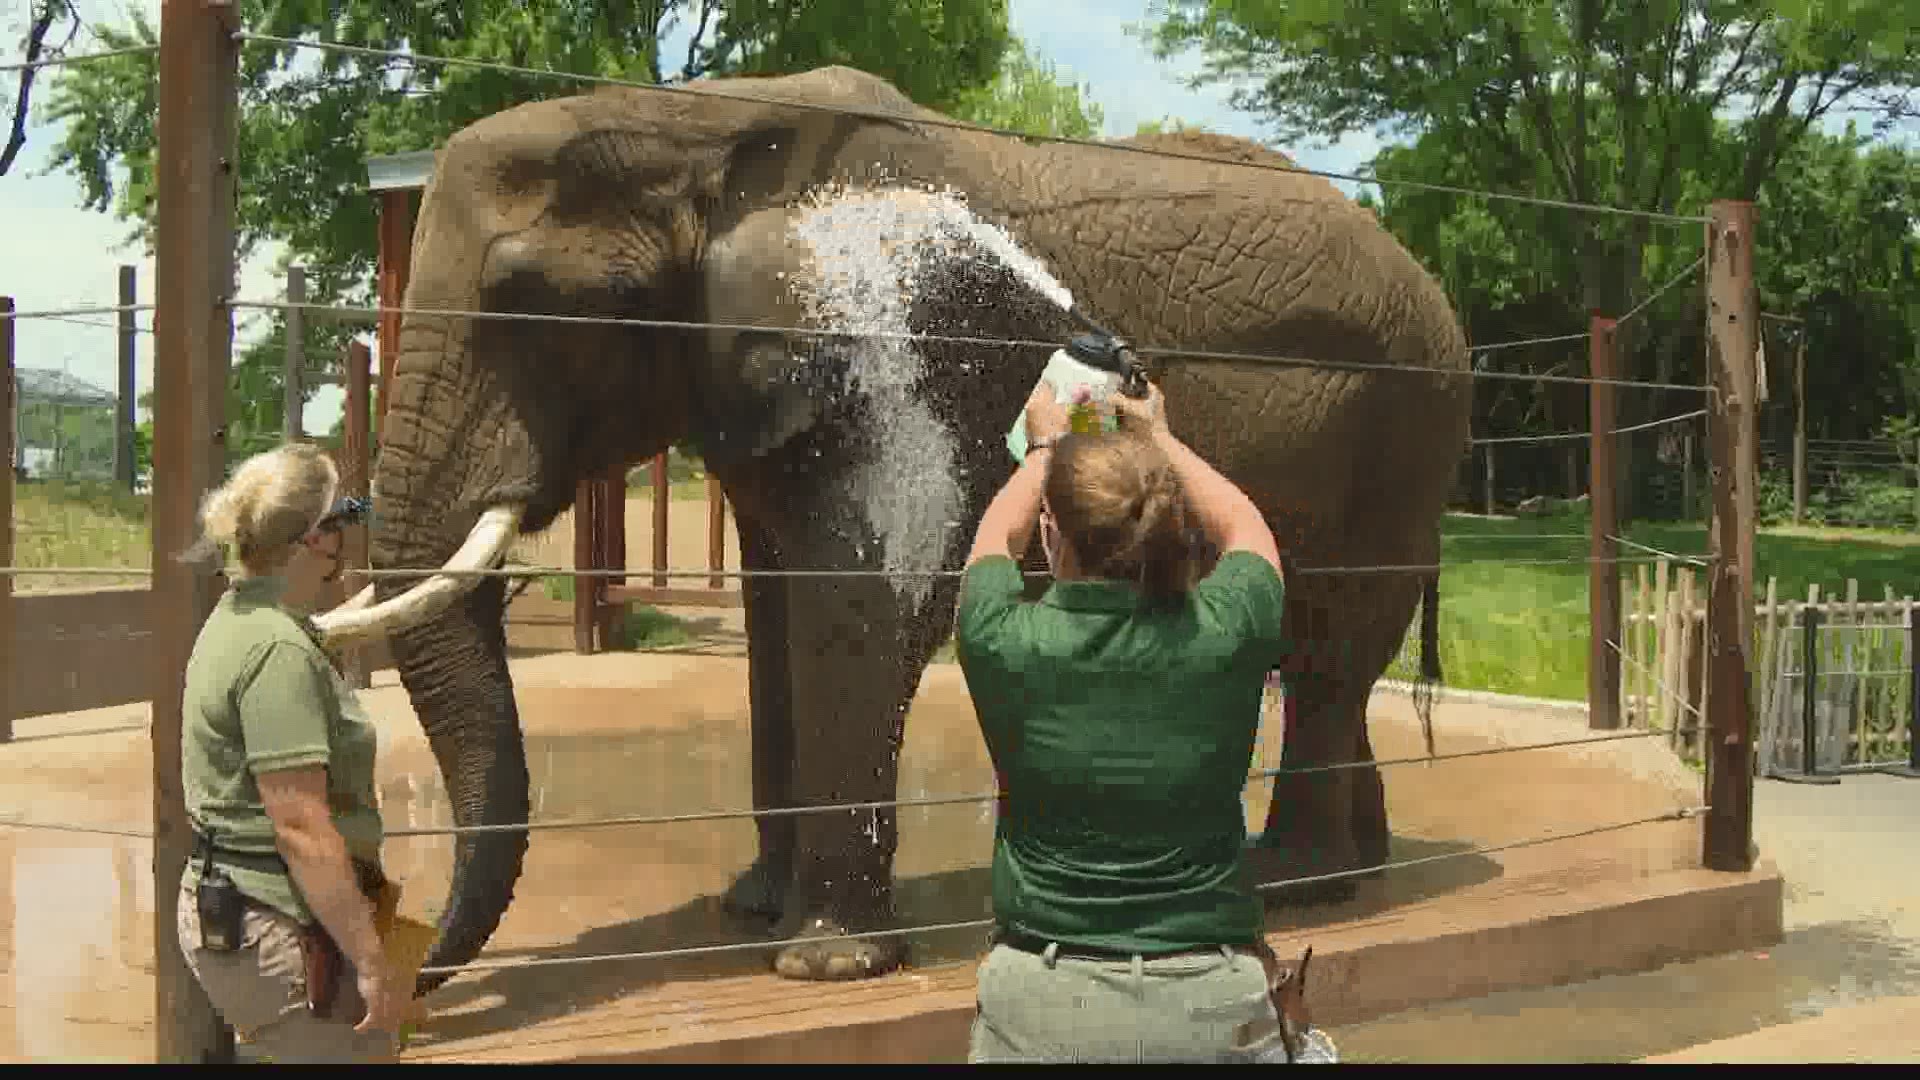 There's a brand new elephant encounter at the Indianapolis Zoo.